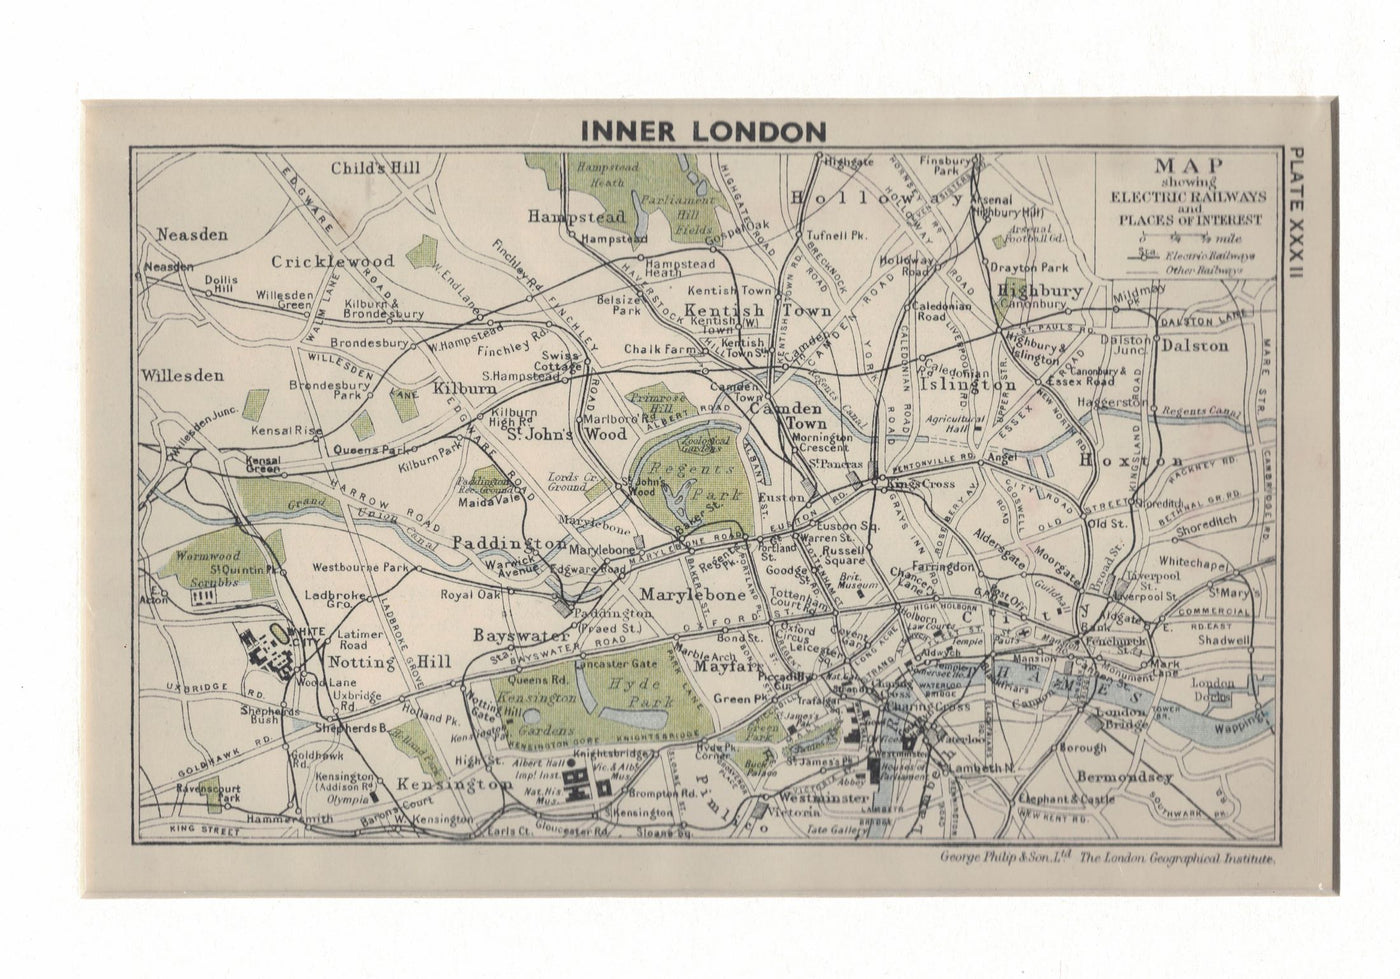 Inner London antique map published 1933